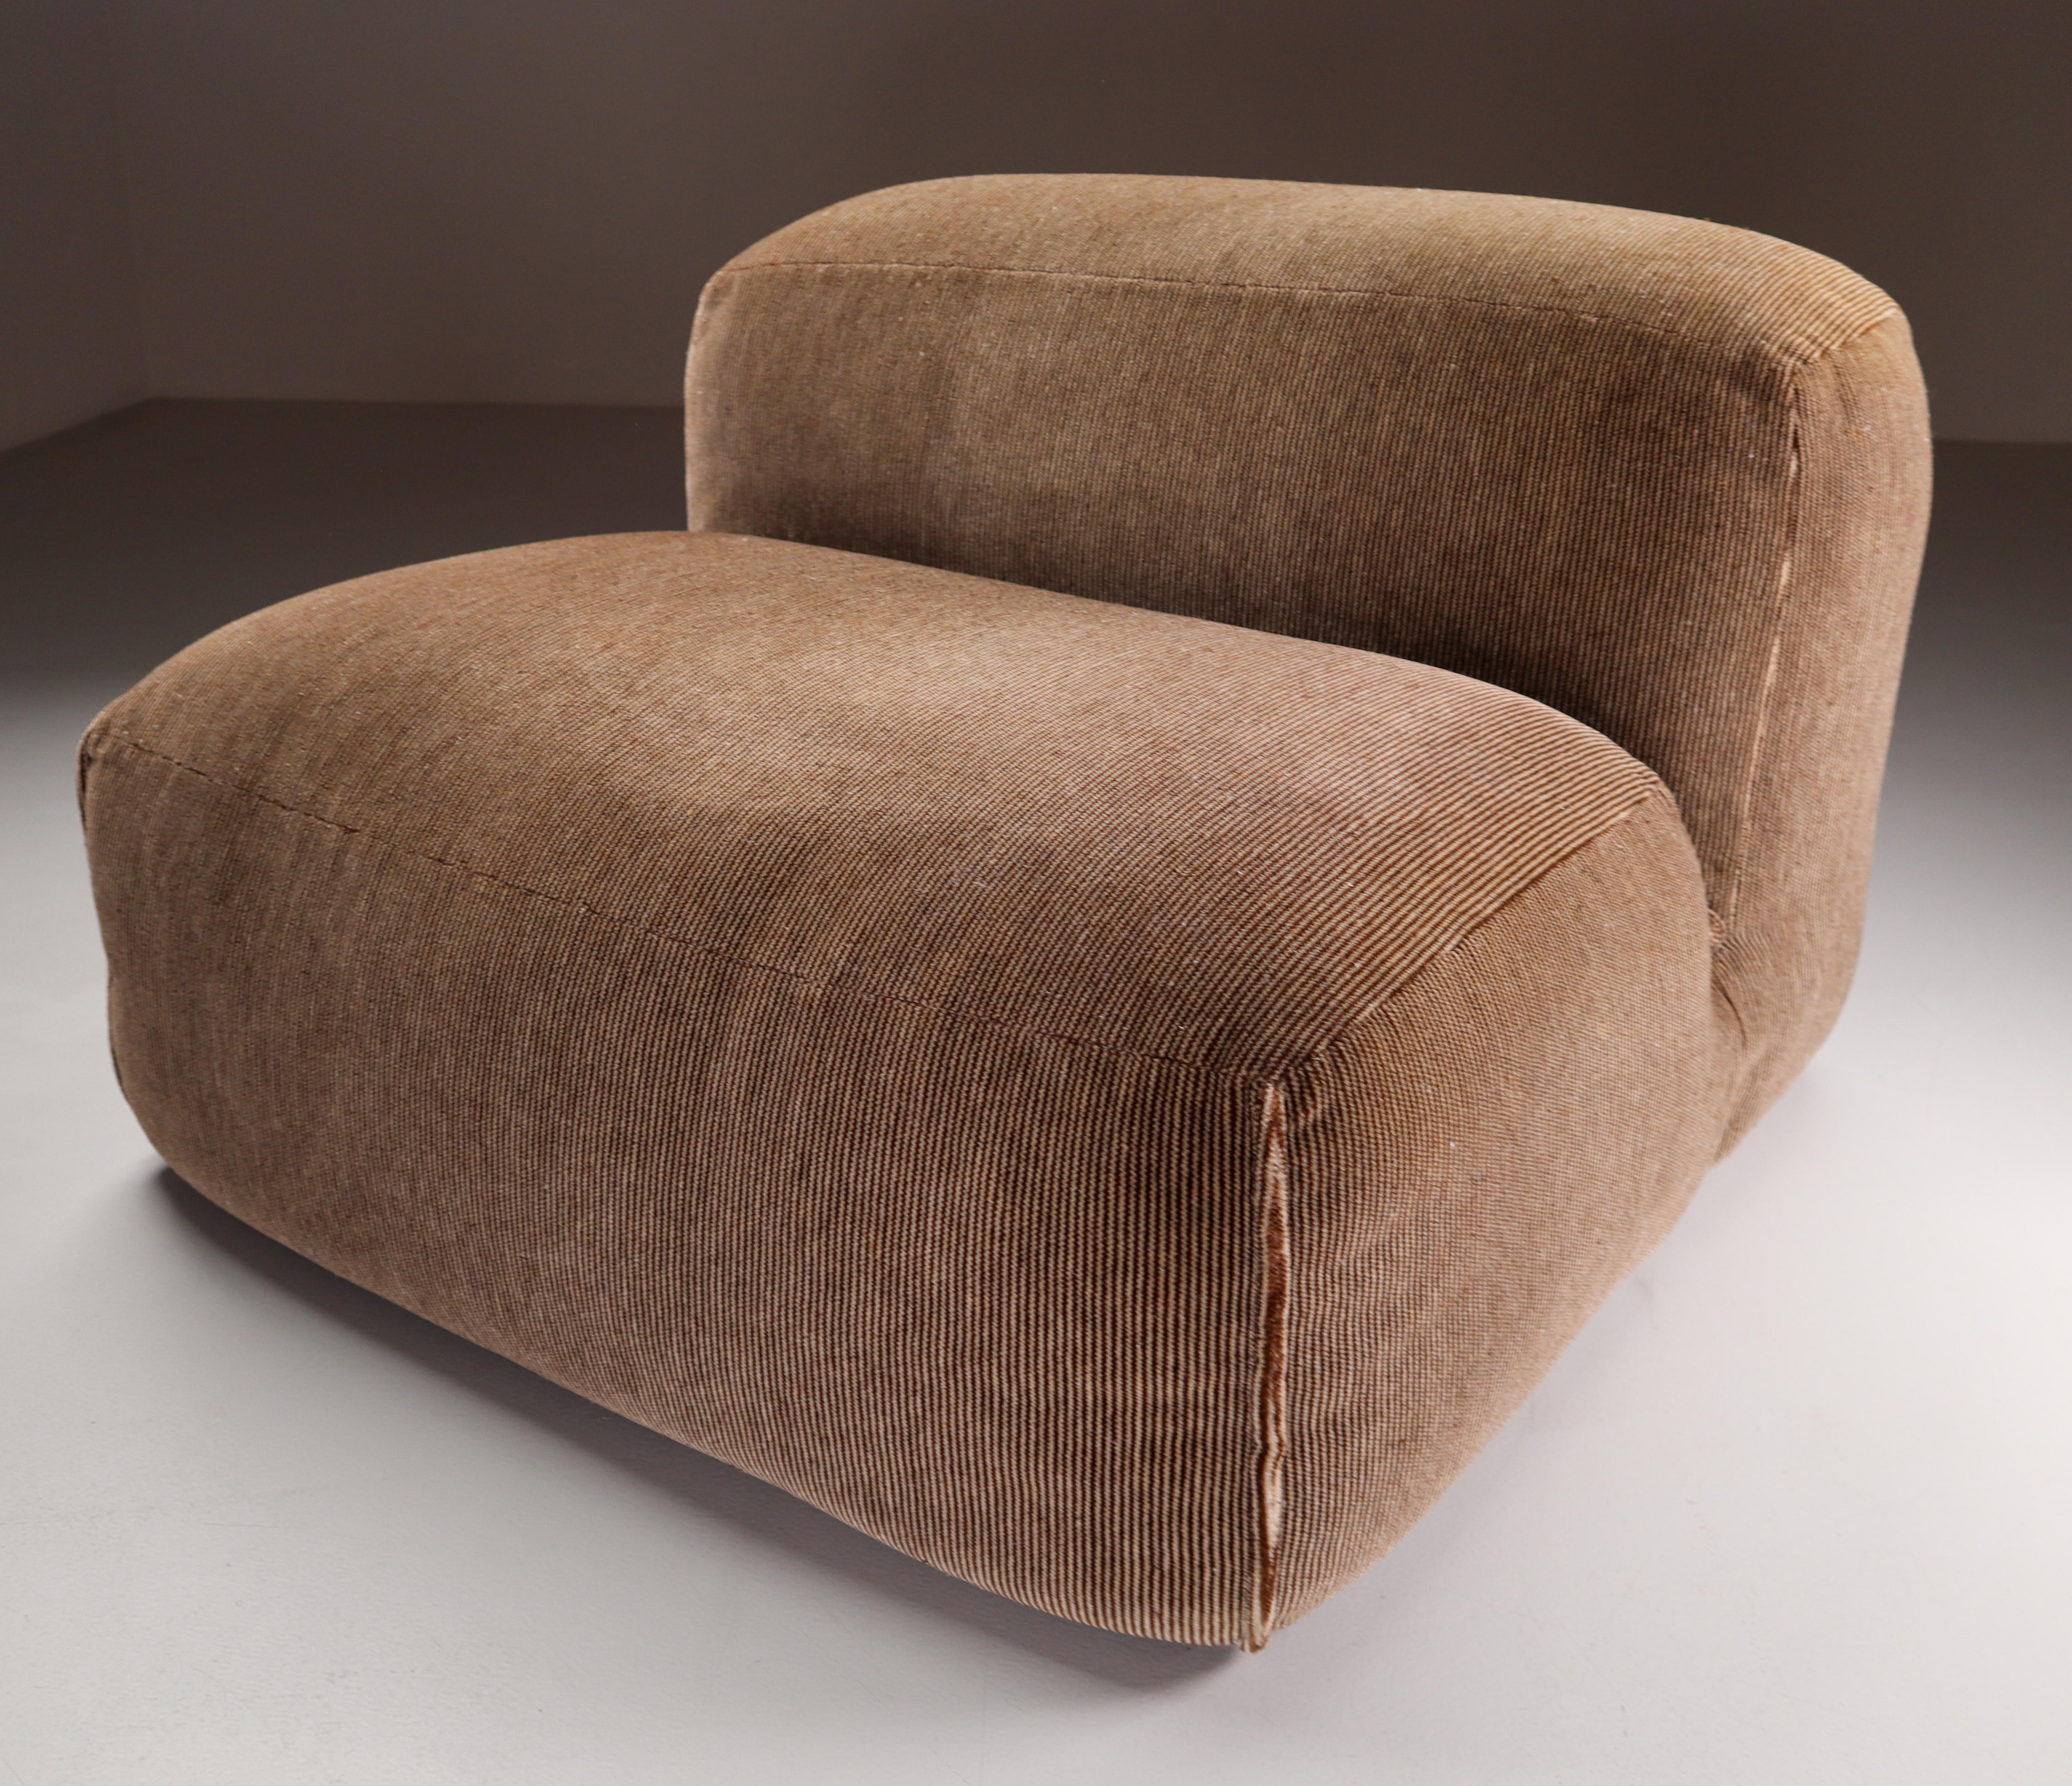 Exceptional and extremely rare Le Mura lounge chair by Mario Bellini for Cassina, Italy, 1970s. It is similar to the Camaleonda by Mario Bellini, but the Le Mura was in production for a limited time and much less produced and therefore very rare.